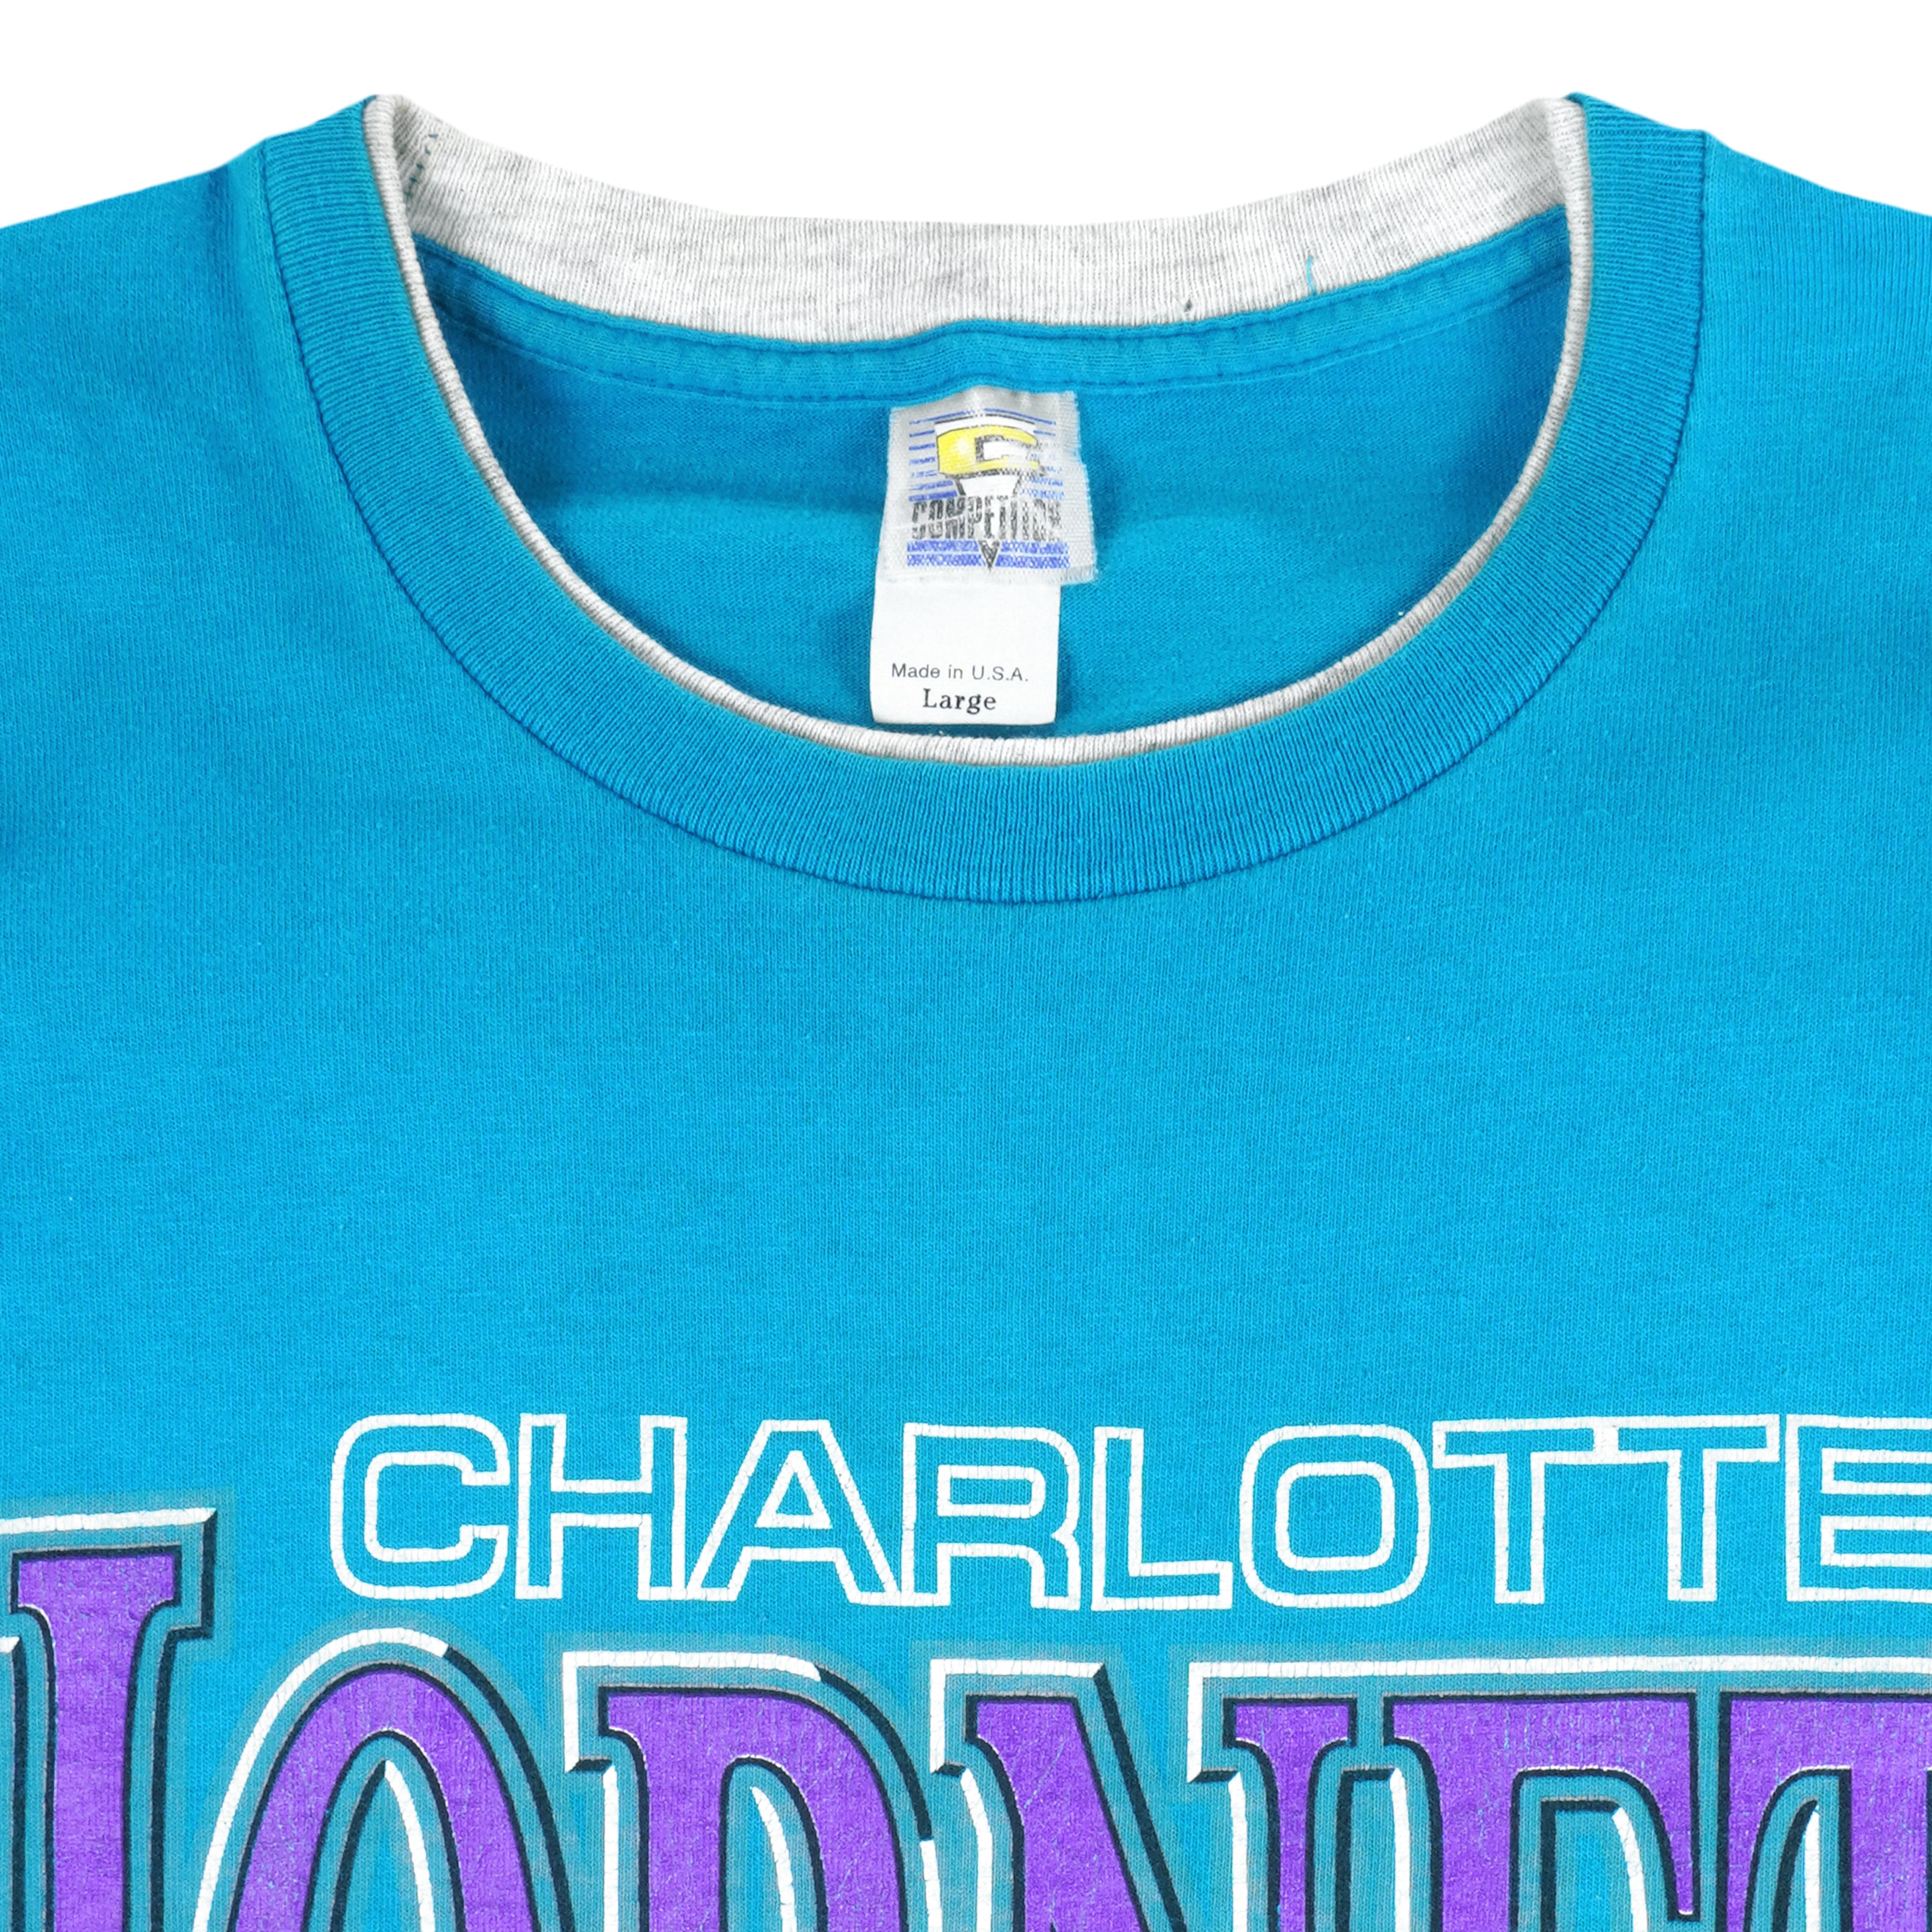 VINTAGE NBA CHARLOTTE HORNETS TEE SHIRT 1992 SIZE 2XL MADE IN USA